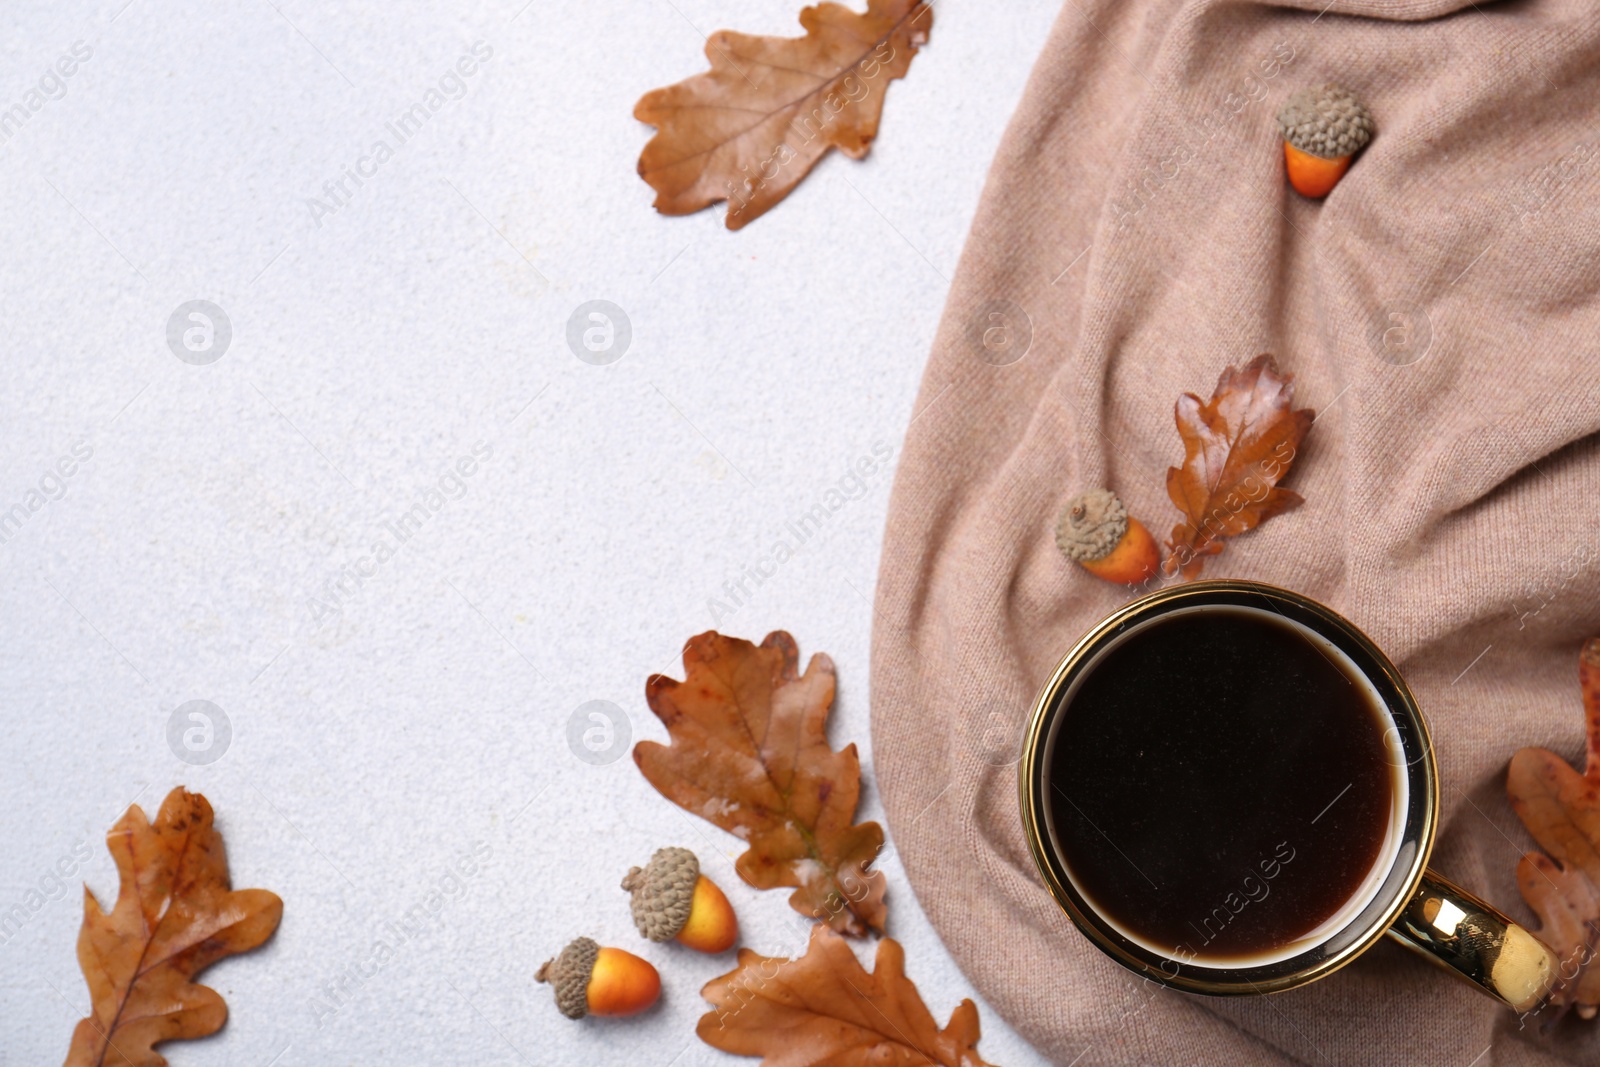 Photo of Flat lay composition with cup of hot drink and autumn leaves on light grey textured table. Space for text